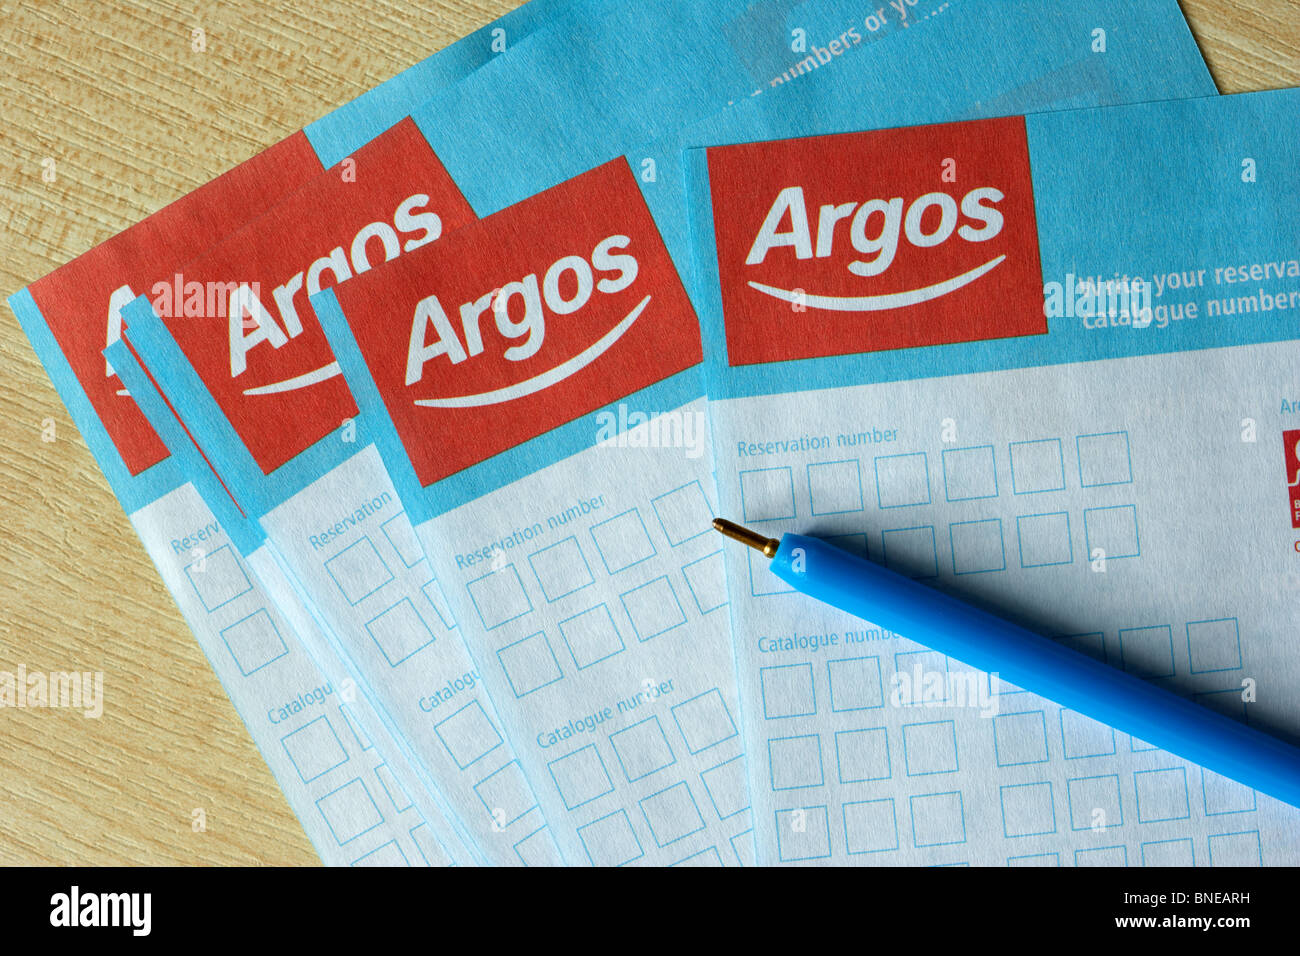 Argos reservation or catalogue number order forms with pen Stock Photo